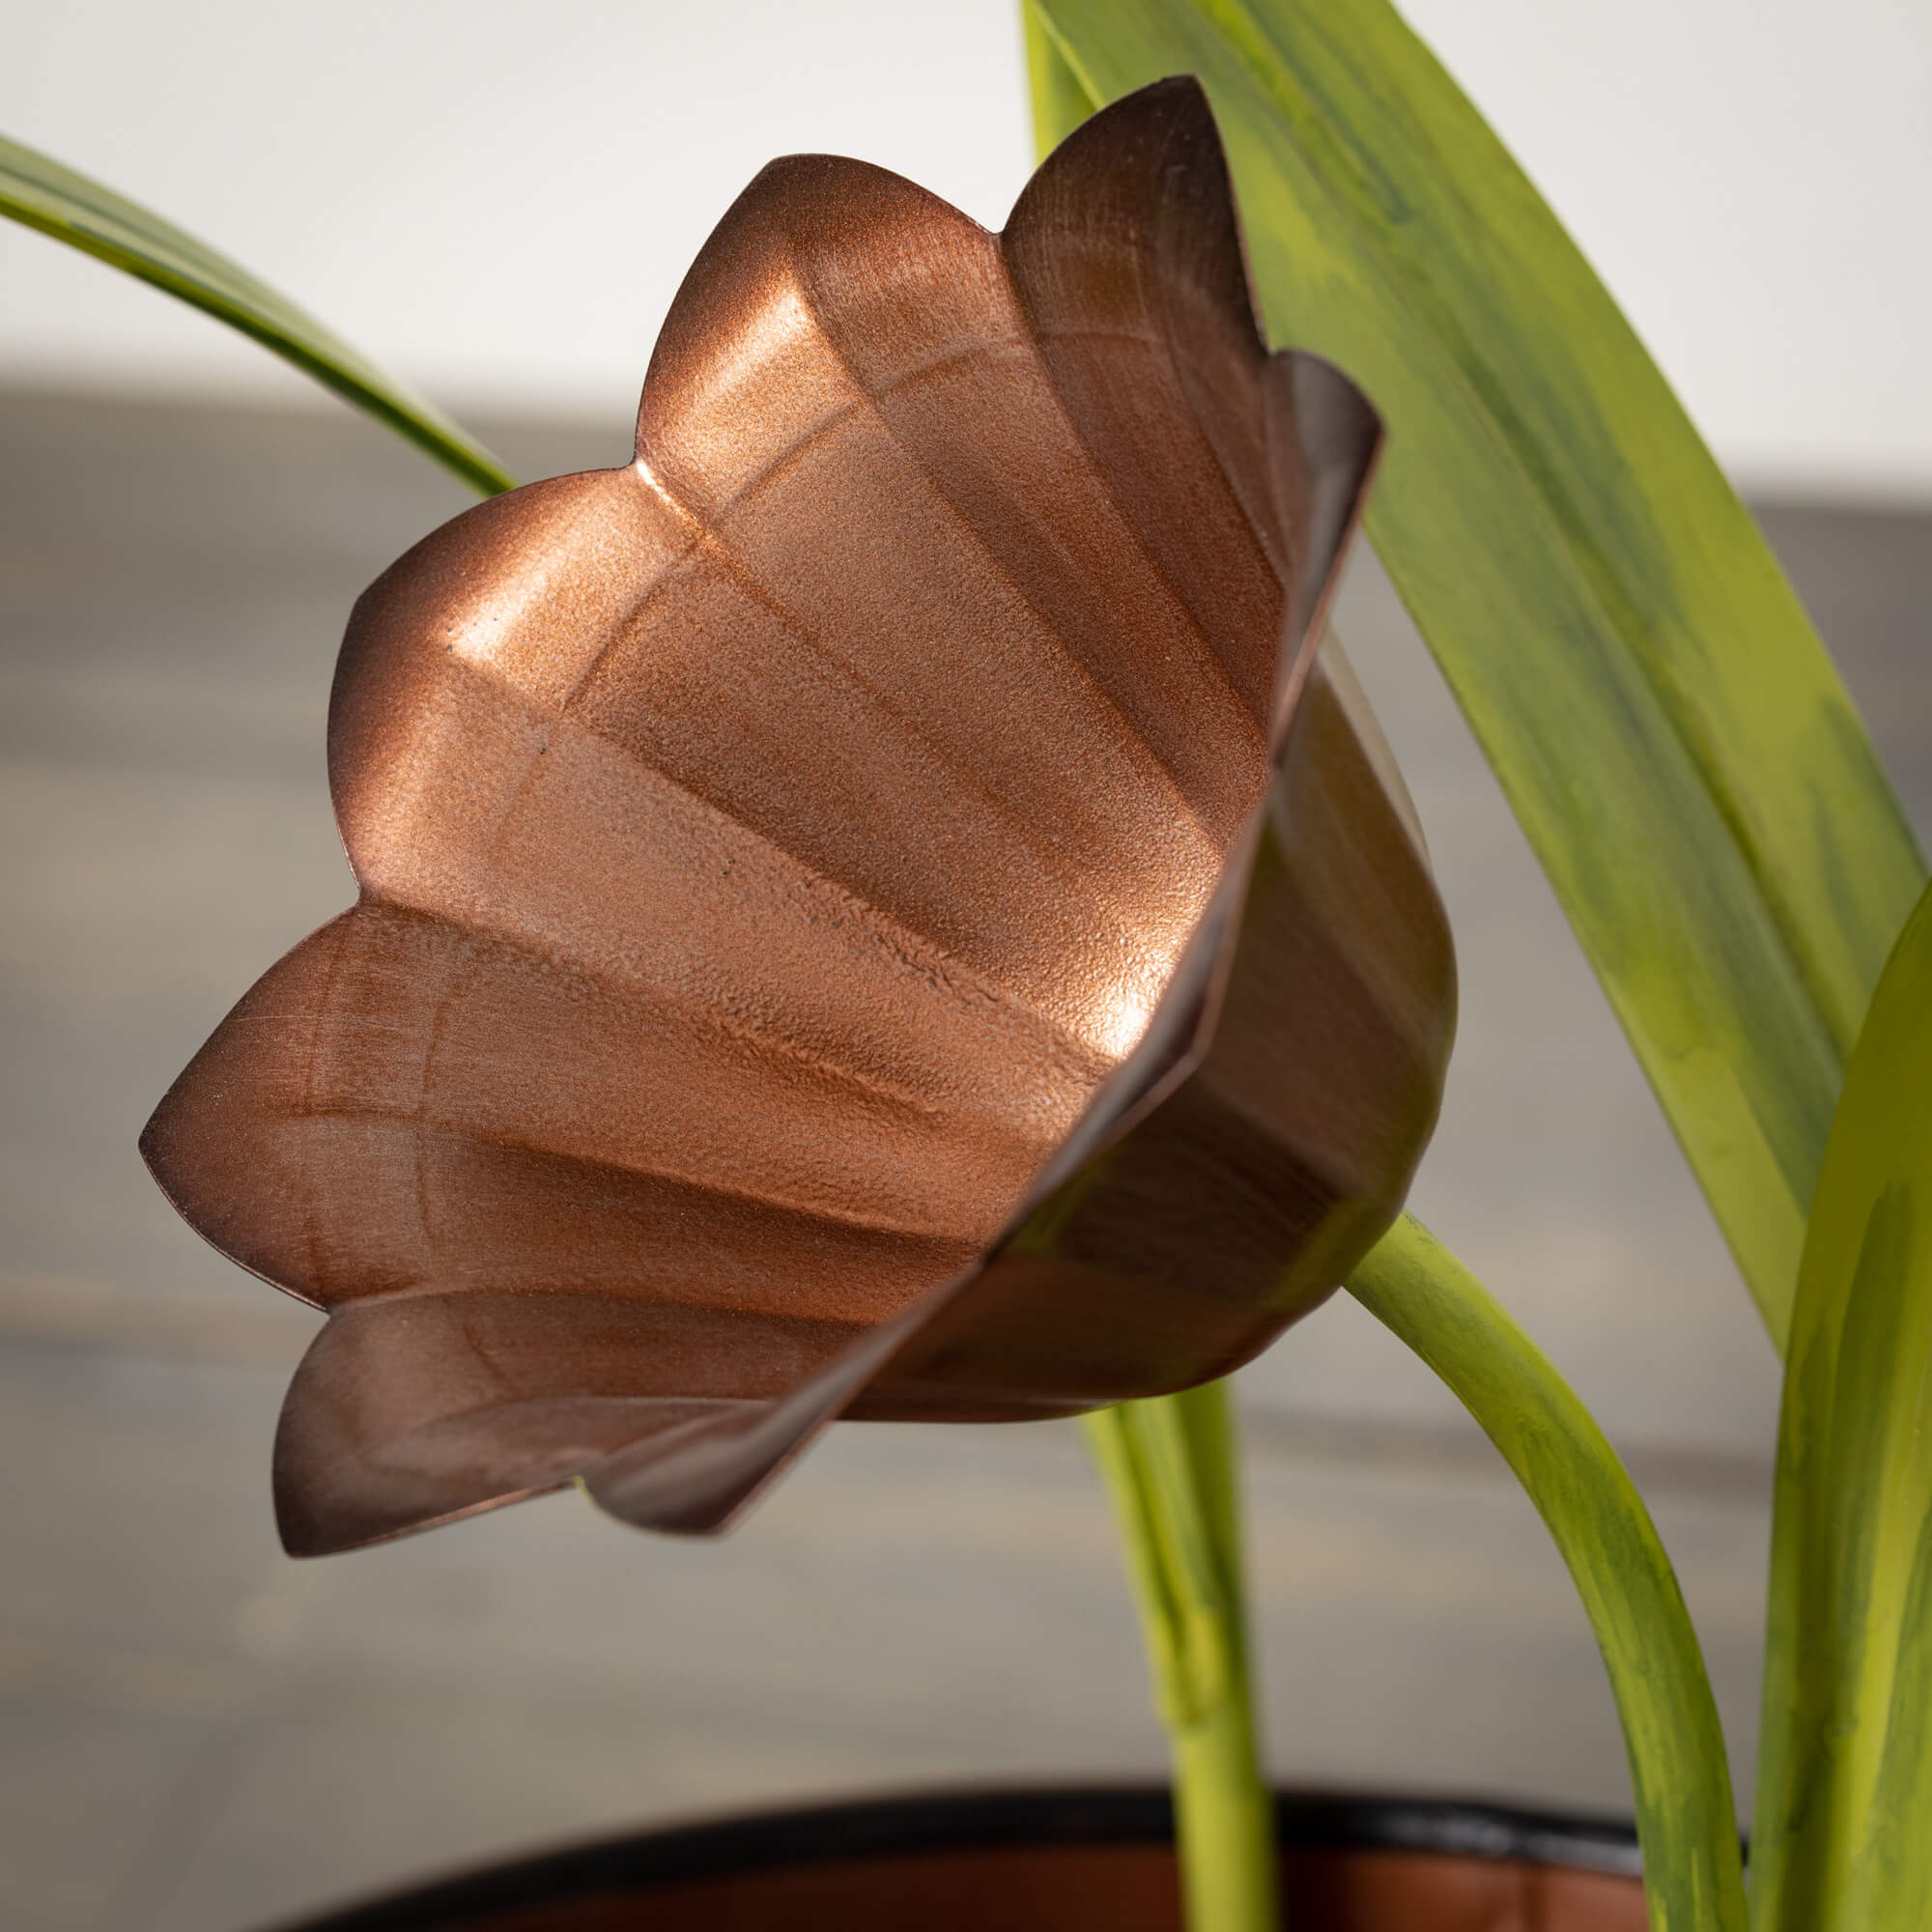 Copper Cala Lily Tabletop Fountain Elevate Home Decor - Outdoors